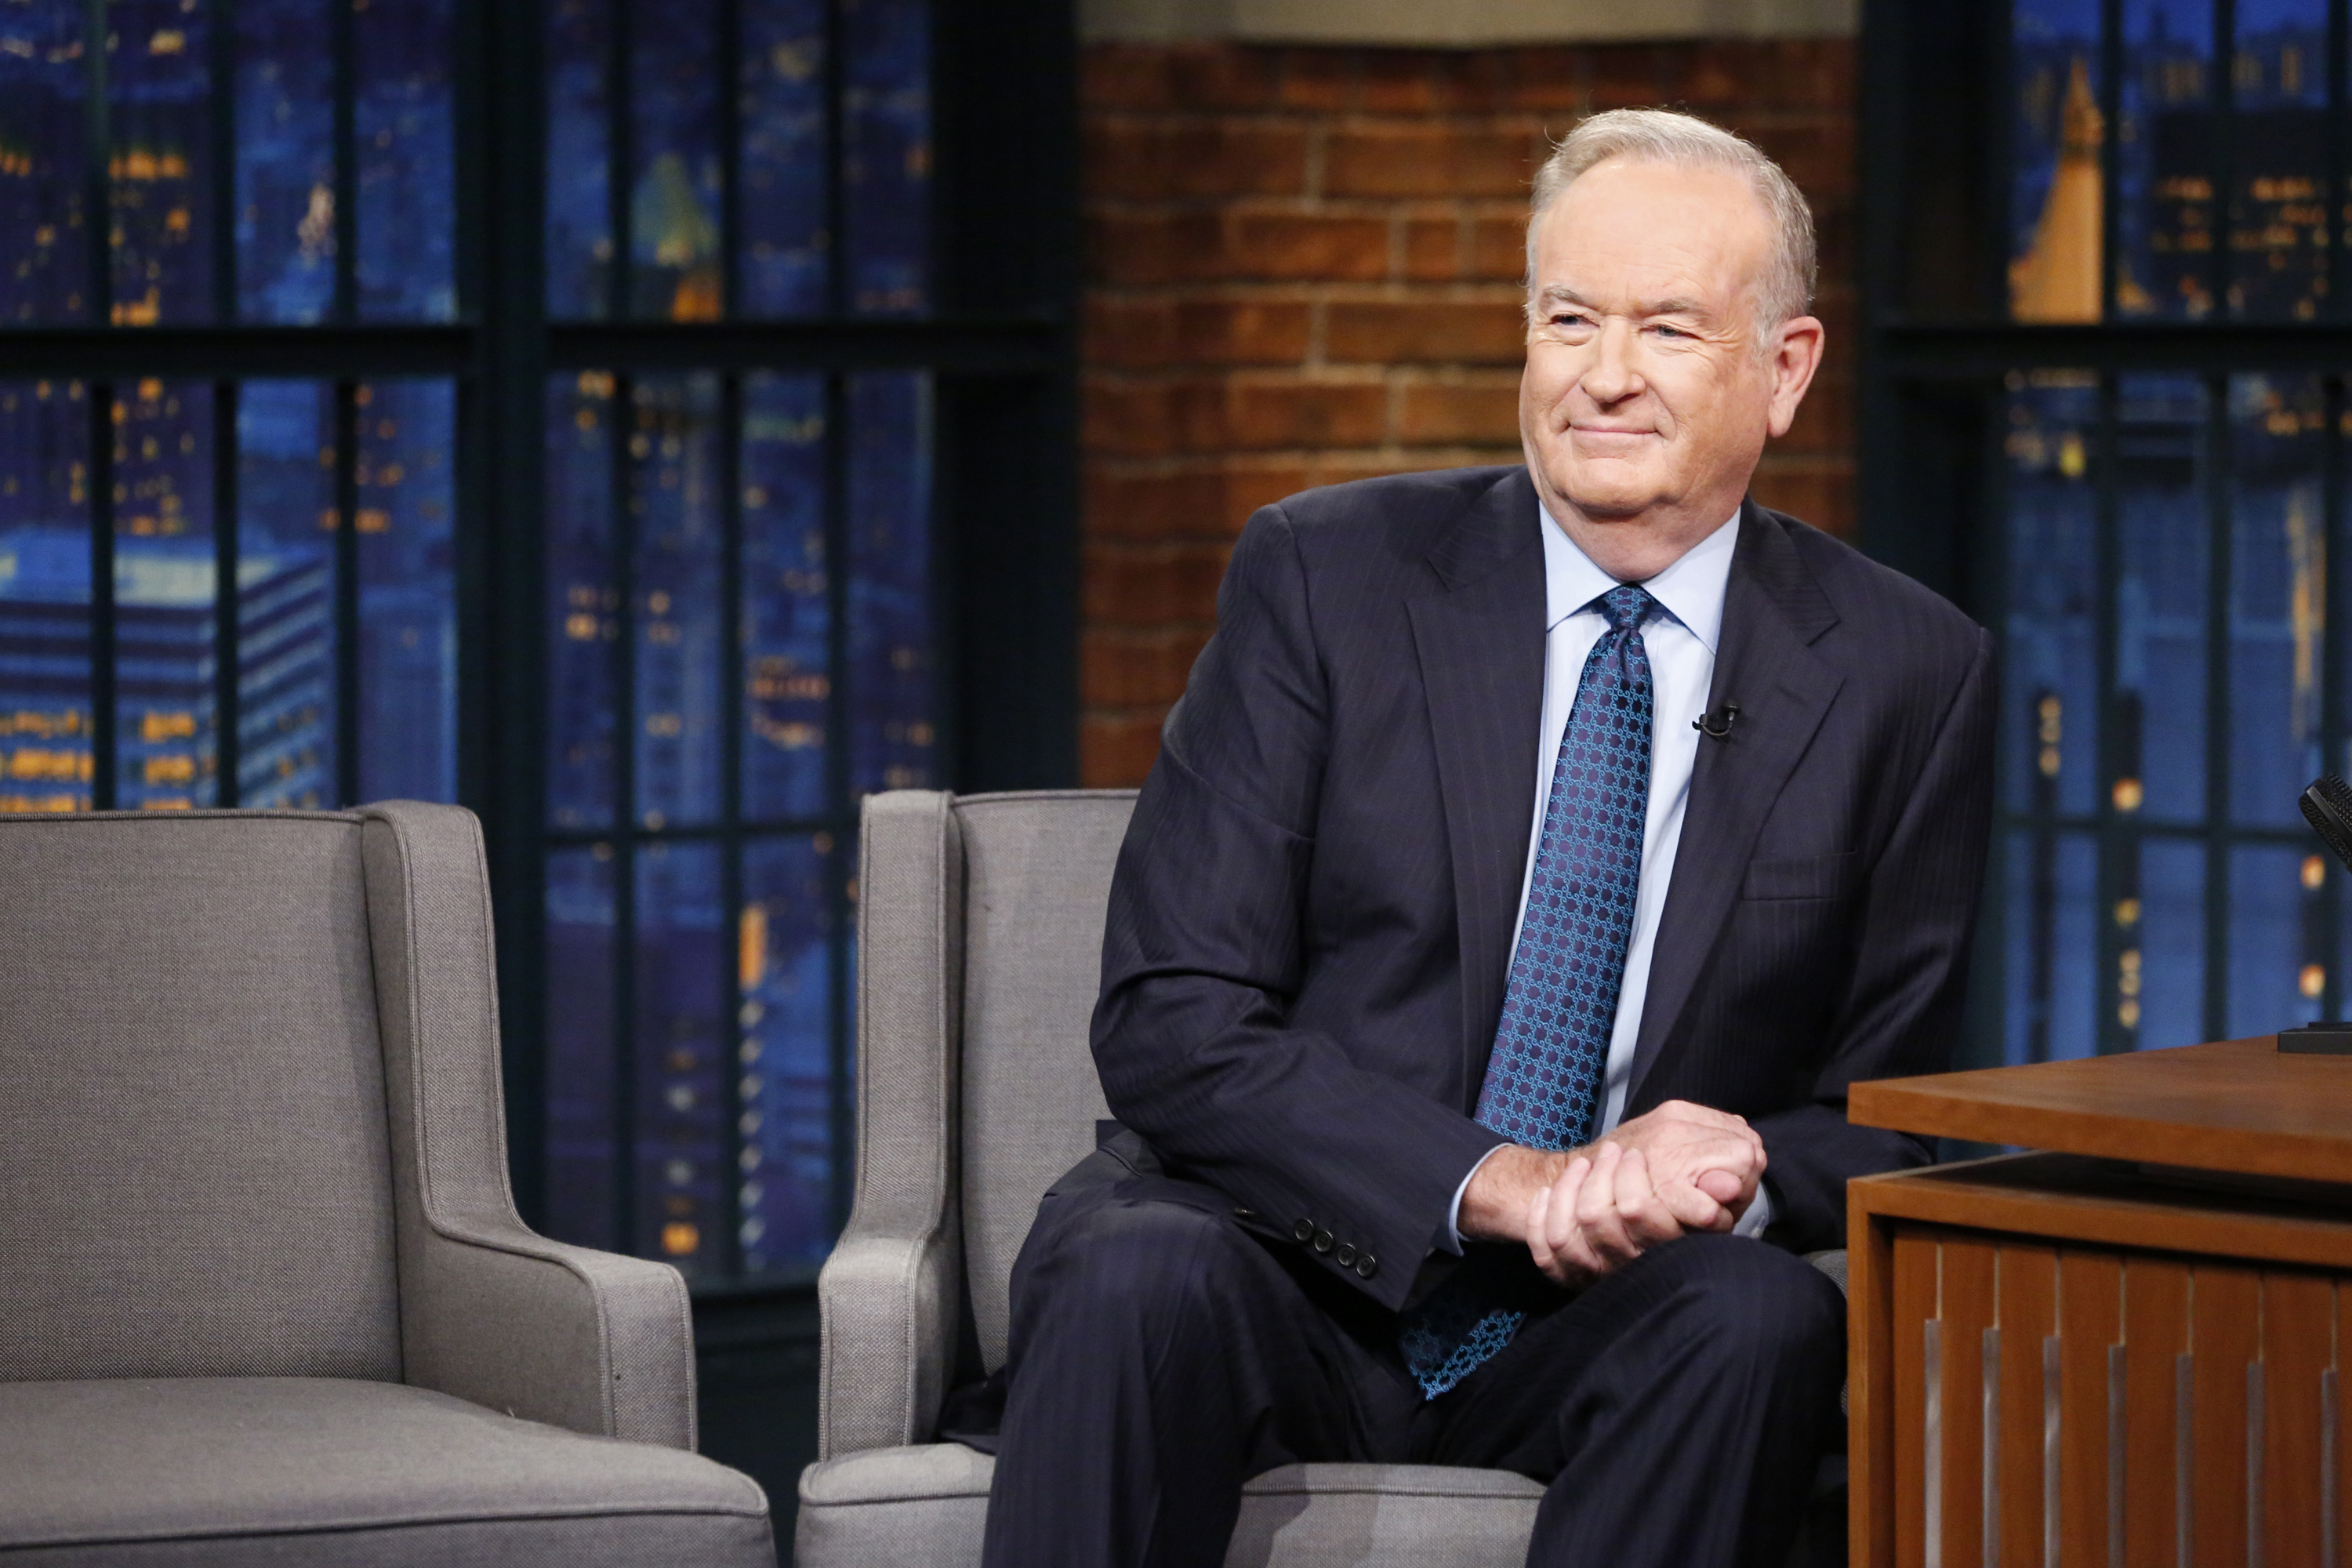 LATE NIGHT WITH SETH MEYERS -- Episode 392 -- Pictured: Political commentator, Bill O'Reilly, during an interview on July 13, 2016 -- (Photo by: Lloyd Bishop/NBC/NBCU Photo Bank via Getty Images) (NBC—NBCU Photo Bank via Getty Images)